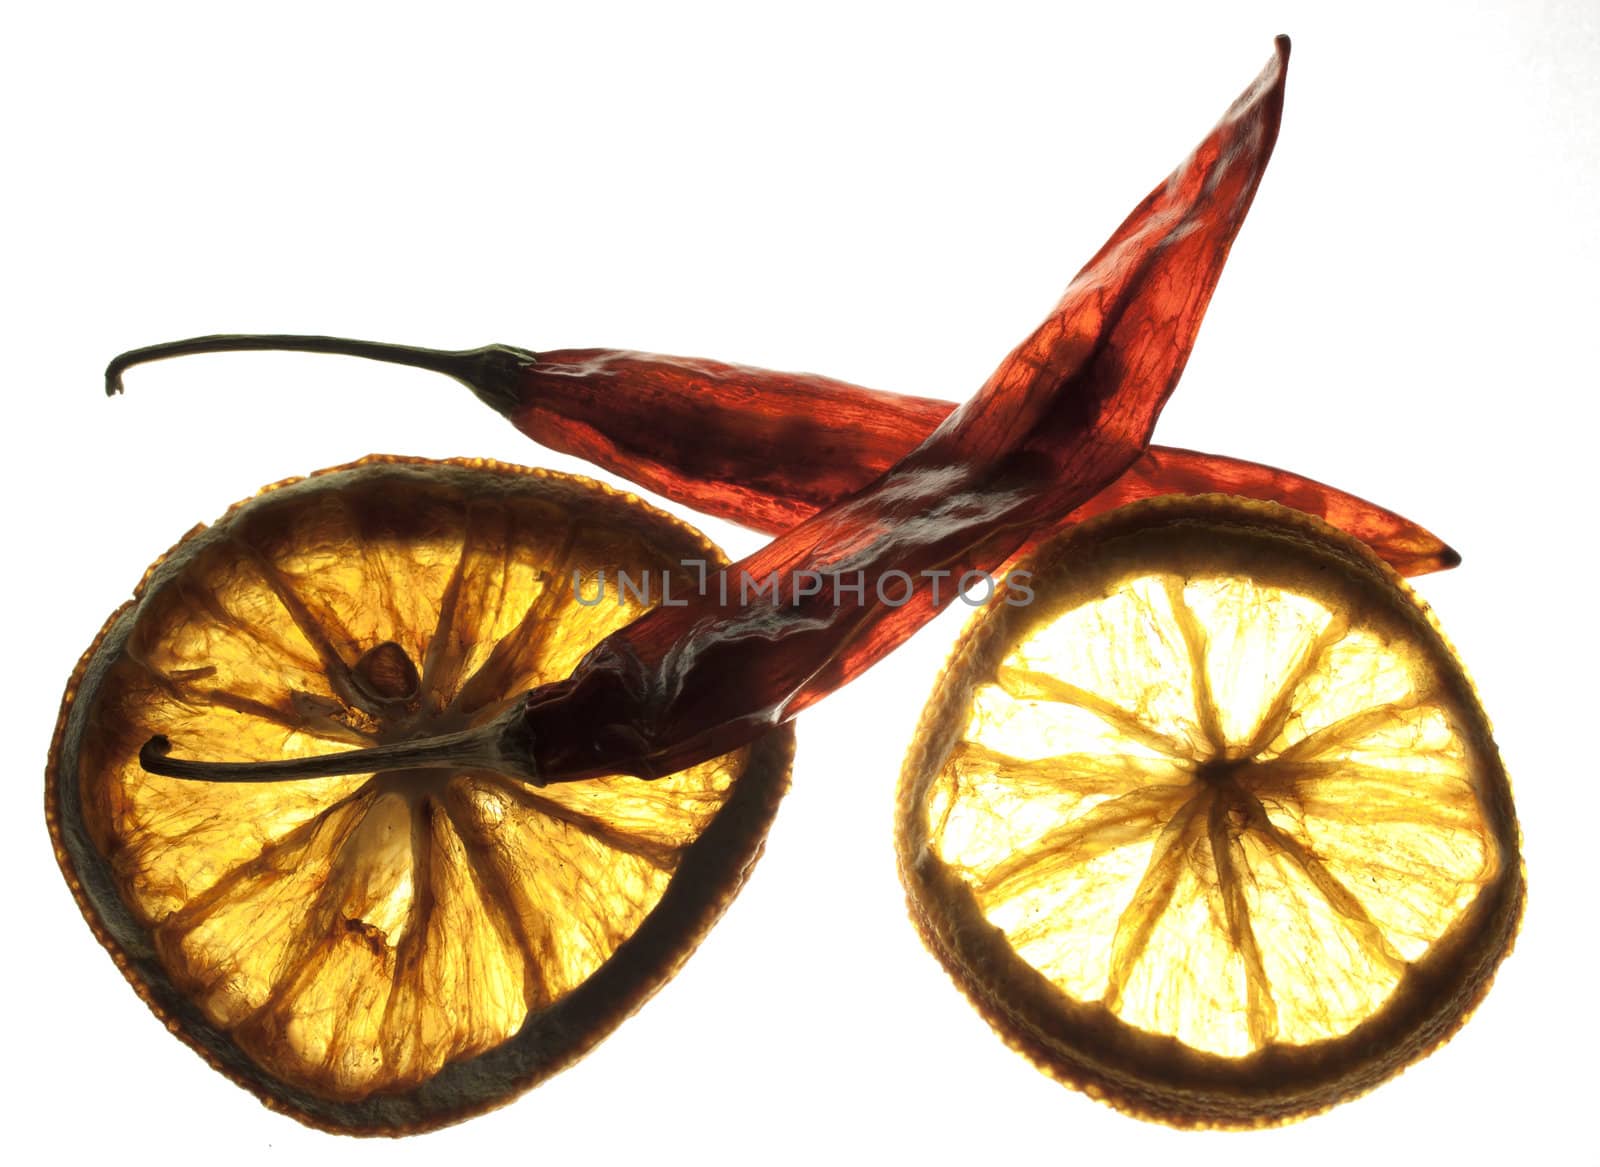 Dry lemons and peppers as a bicycle concept